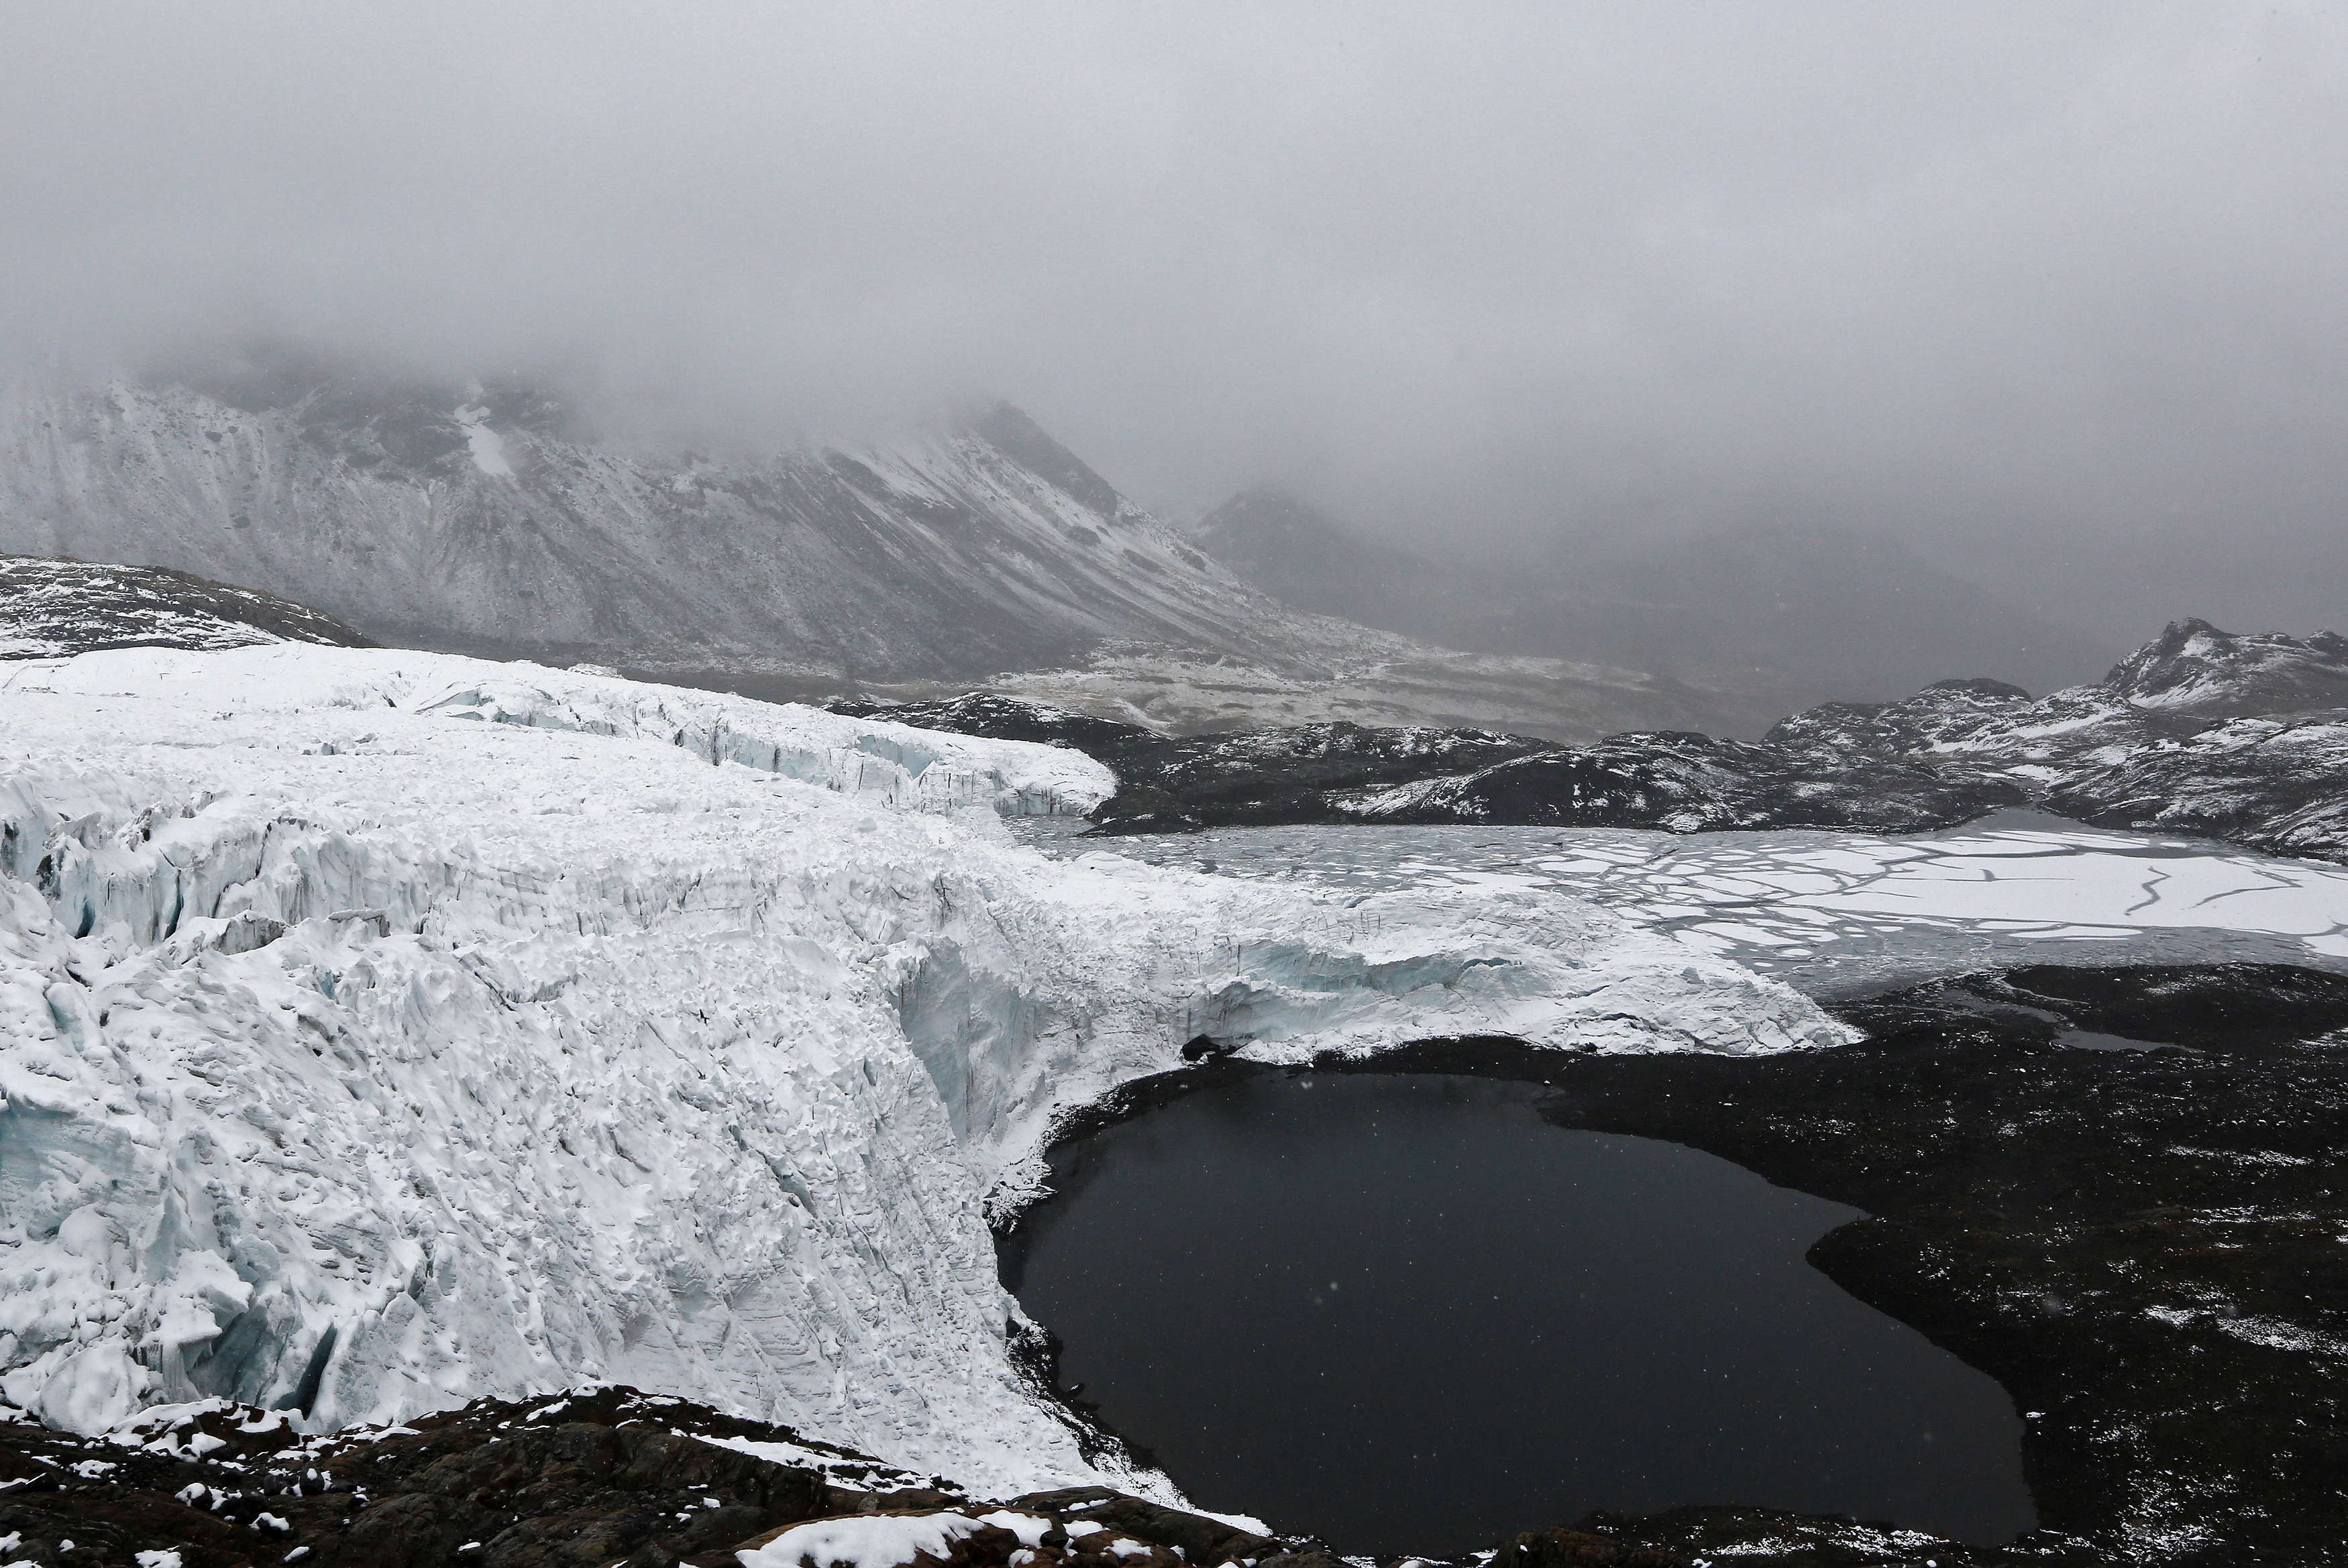 A view of the lake formed by meltwater from the Pastoruri glacier, as seen from atop the glacier in Huaraz